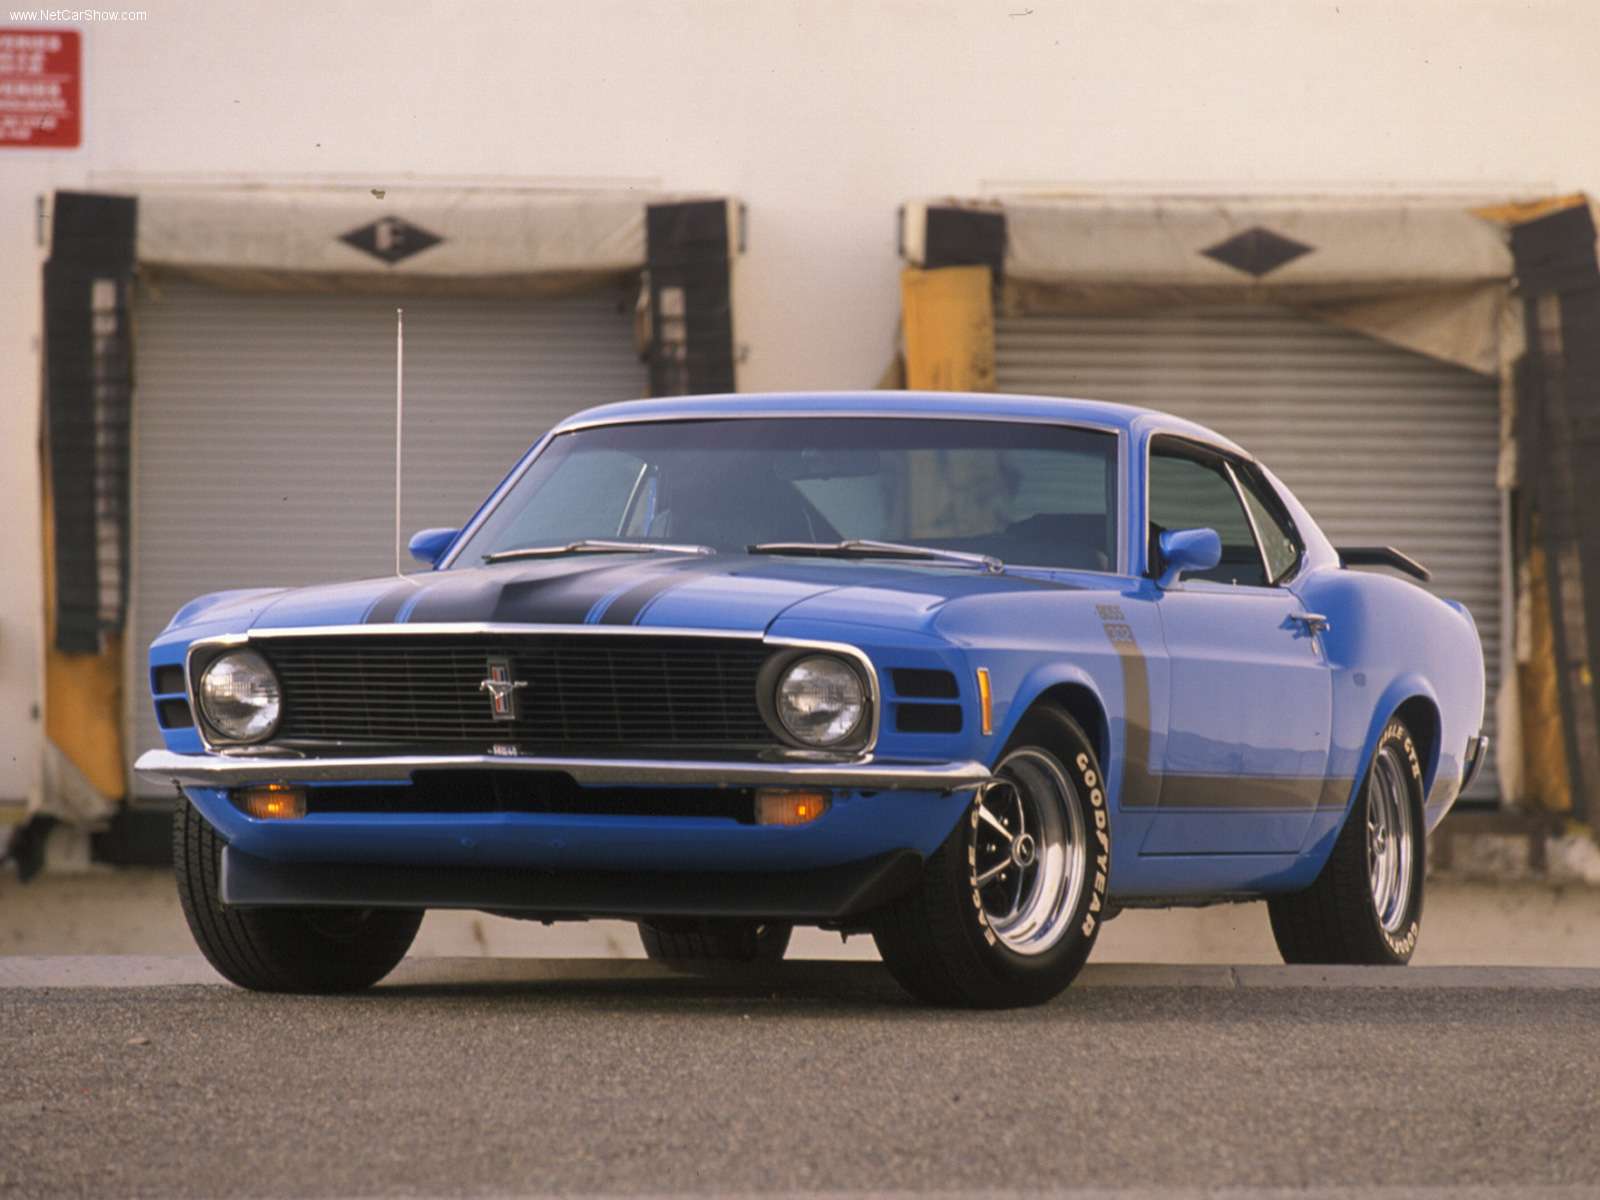 Free Amazing HD Wallpapers 1970 Mustang Gt